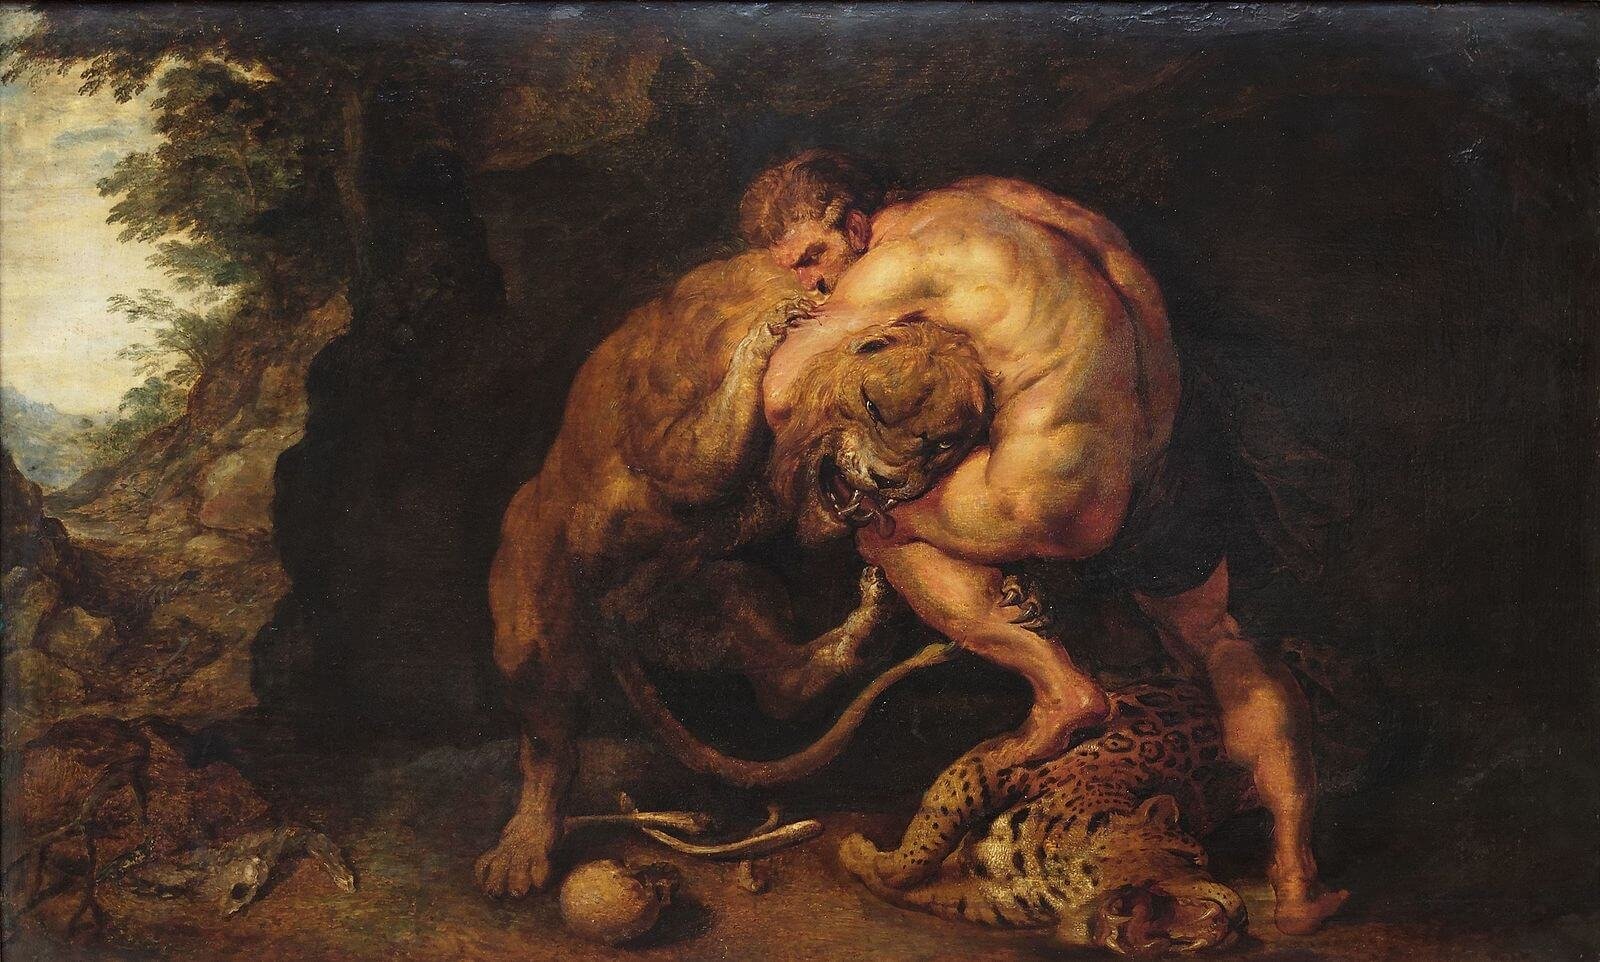 This painting represents Heracles, fighting with the fearsome Nemean Lion.